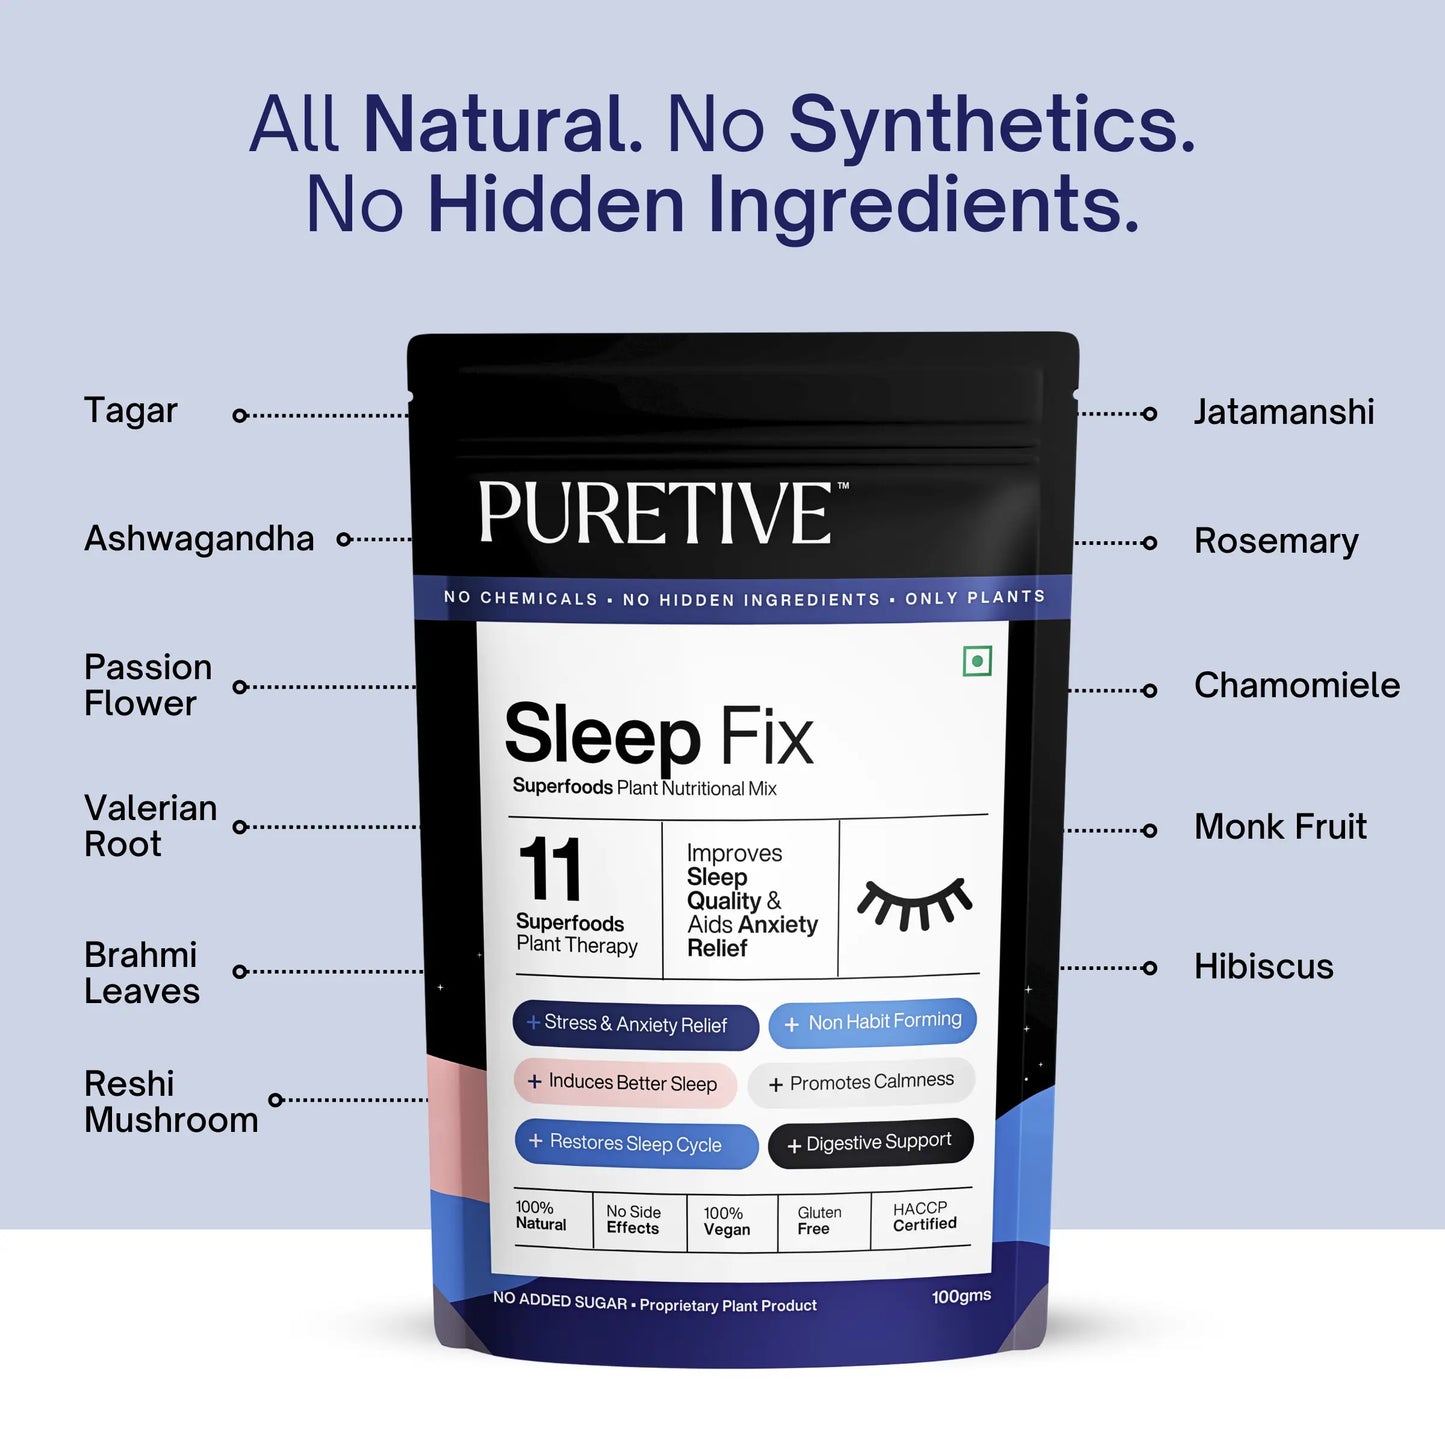 Picture of ingredients that goes inside Puretive's Sleep Fix Nutrition Mix as we believe in Transparency. Puretive's Sleep Fix Nutrition Mix comes in a 100% Pure blend of Tagar, Ashwagandha, passion flower, valerian root, brahmi leaves, reshi mushroom, jatamanshi, rosemary, chamomiele, monk fruit & Hibisucs.